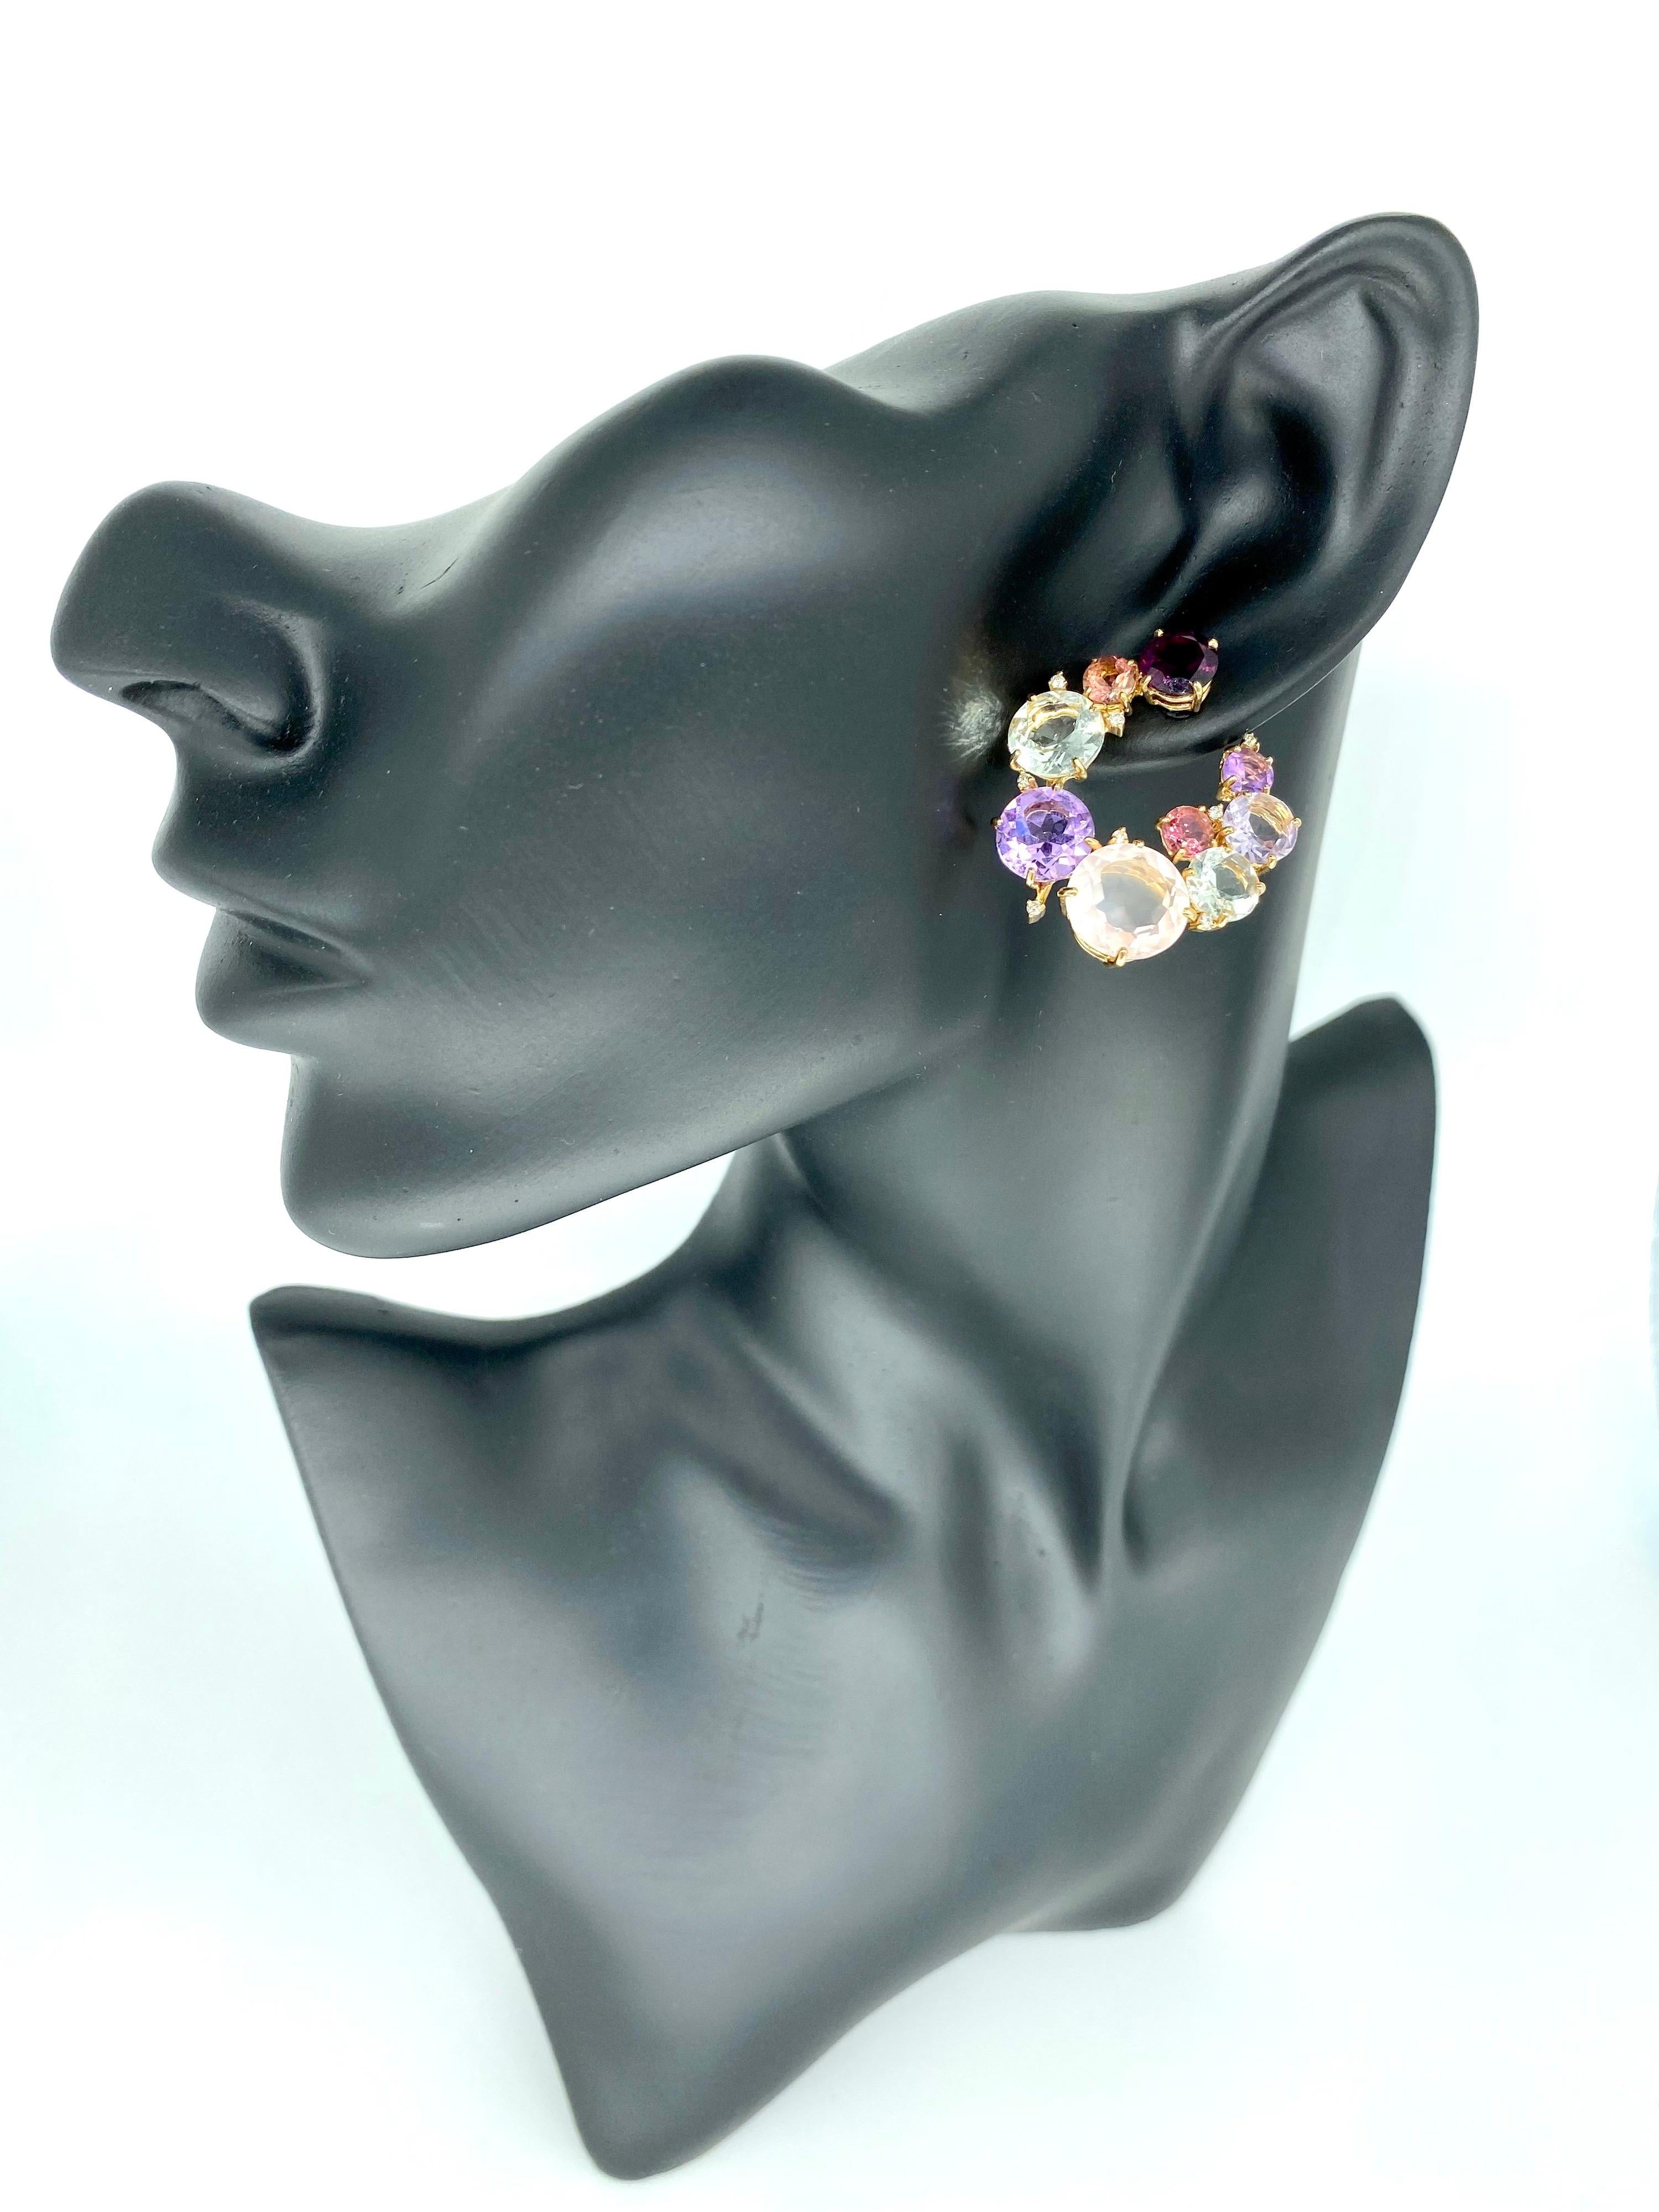 Vintage Designer stamped RV:
55 Carat Multi Gemstone & Diamonds Clip Earrings 18k Rose Gold
The earrings feature beautiful tourmalines, amethyst, Garnet & Diamonds weighting a total of approx 55 carats. Hand crafted by designer and stamped RV 750.